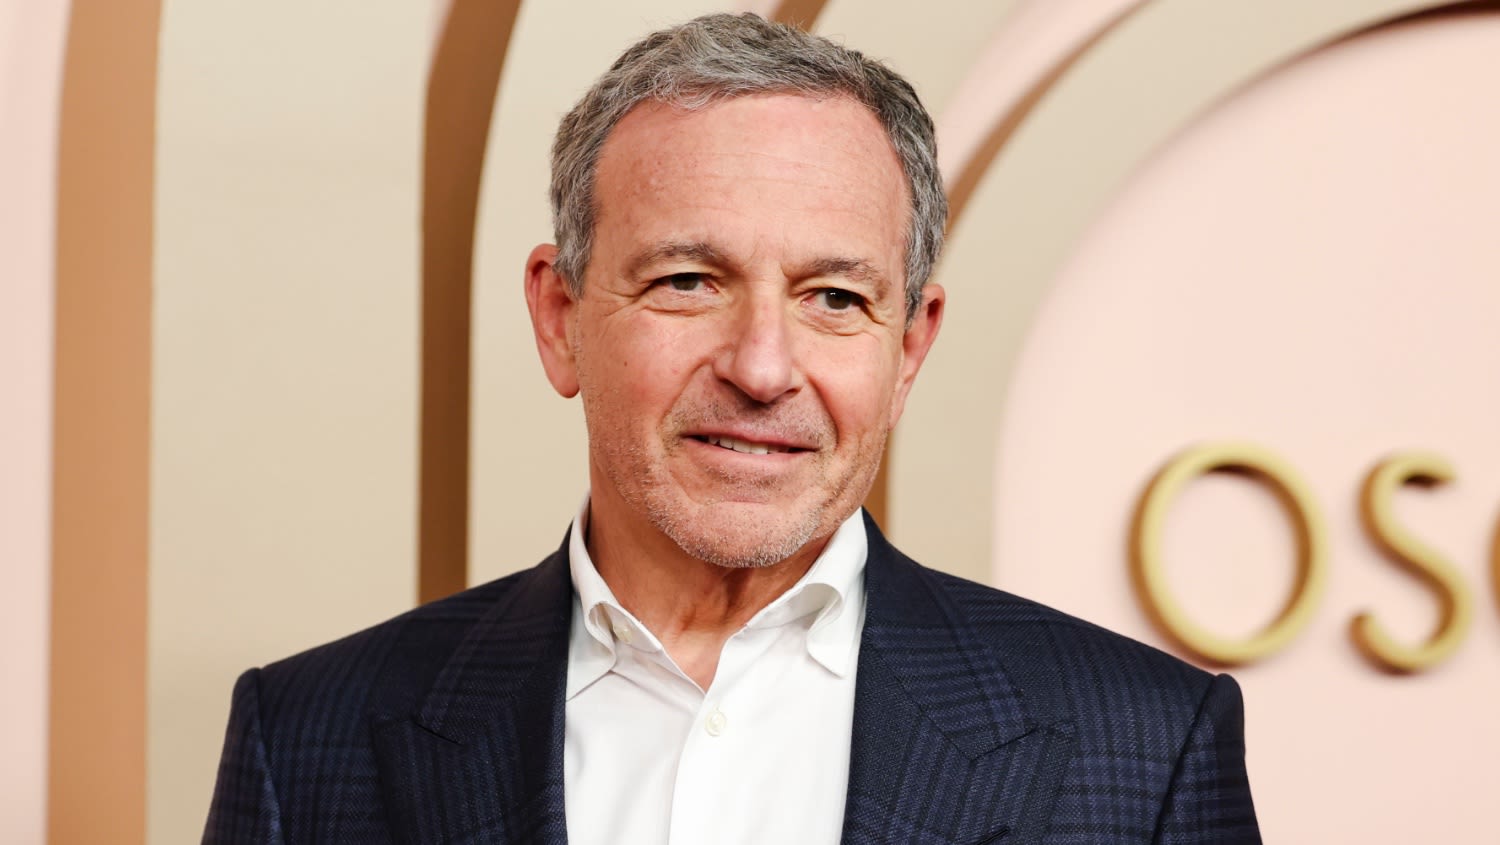 Disney CEO Bob Iger Presented With Honorary Knighthood In Ceremony Presided By Prince William